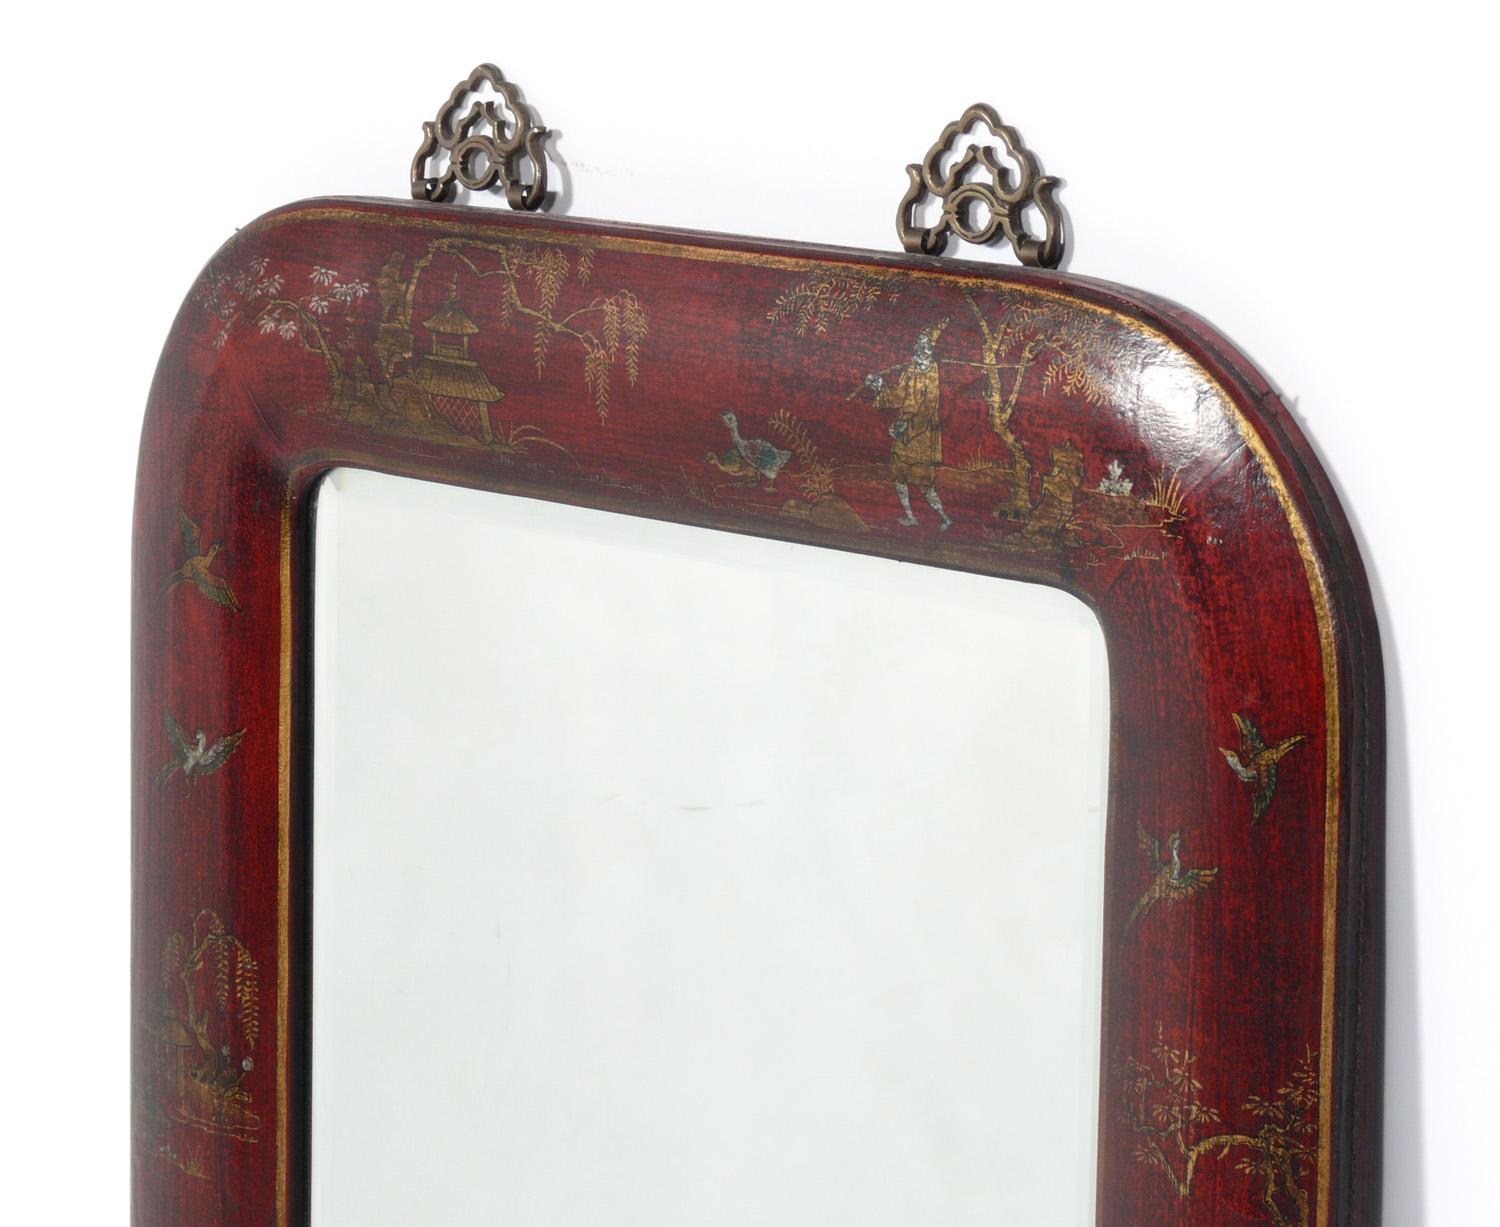 Hand painted leather over wood chinoiserie mirror, probably Chinese, circa 1950s. Retains warm original patina.